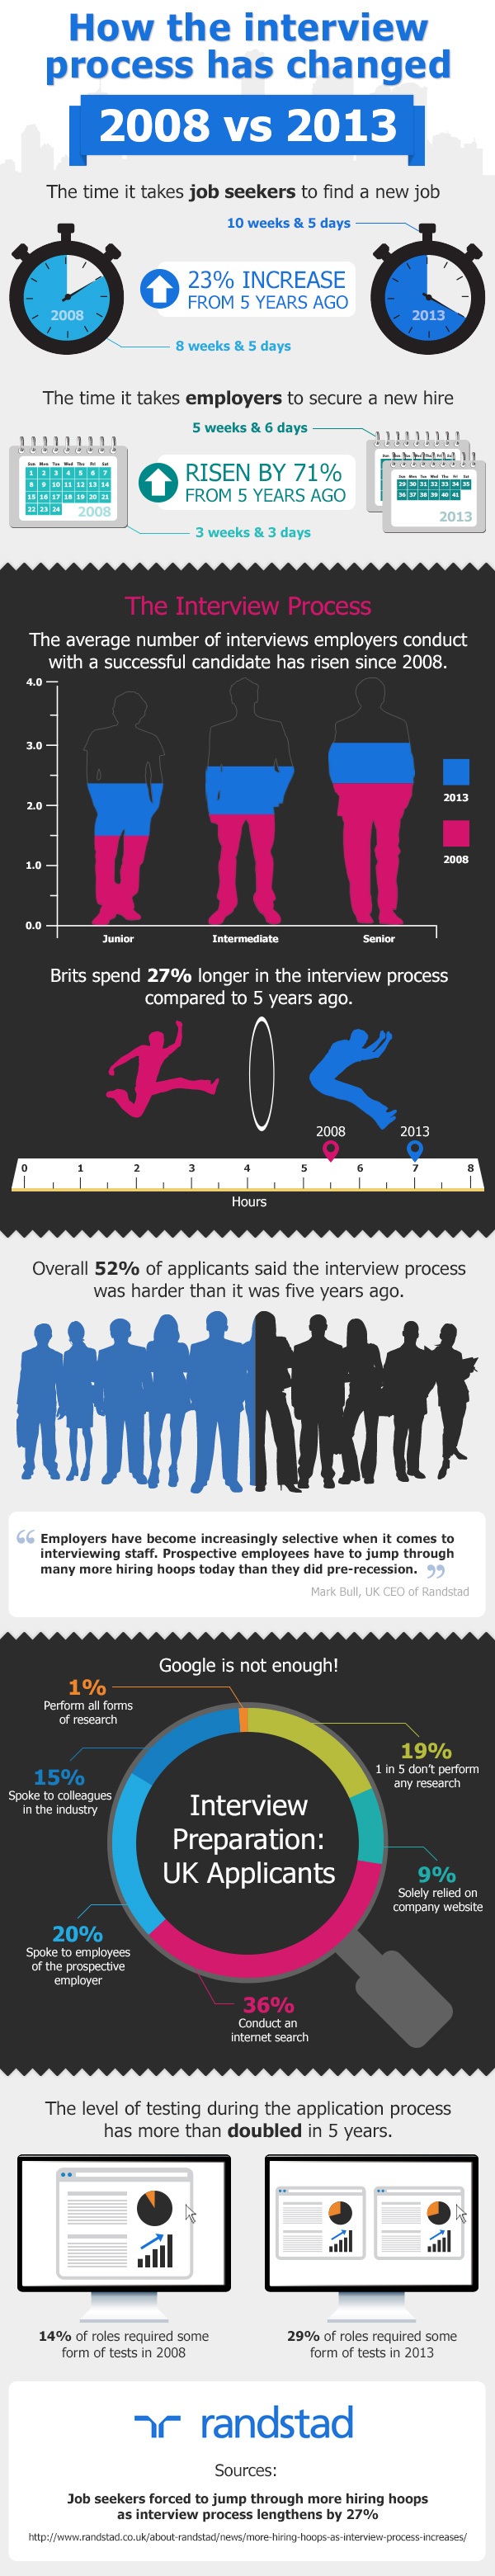 The evolution of the interview process